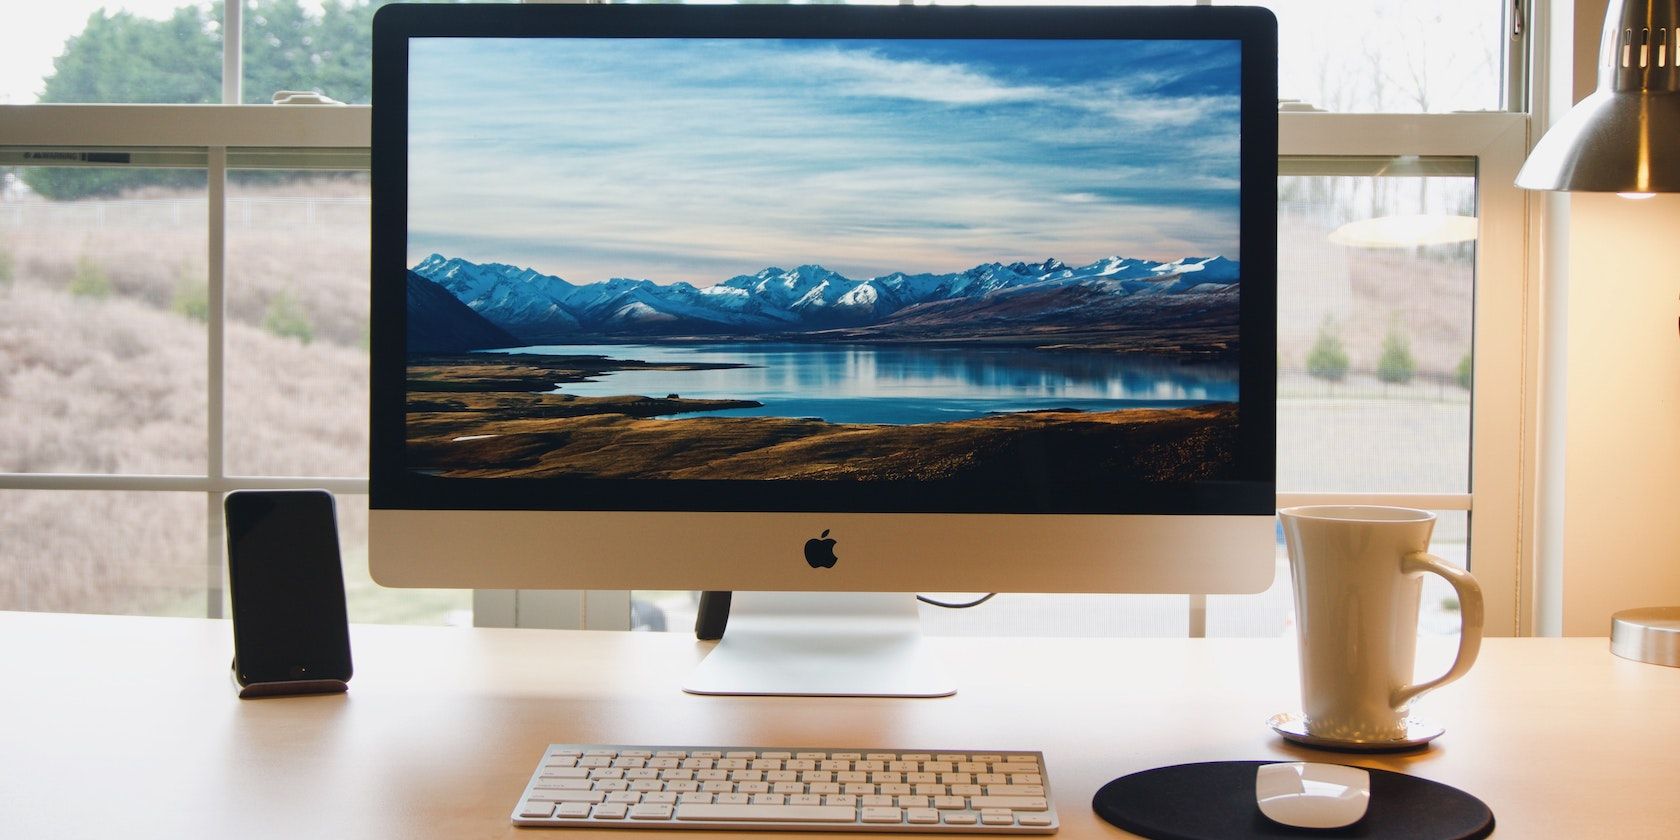 iMac Is Due To Receive Its First Design Upgrade Since 2012